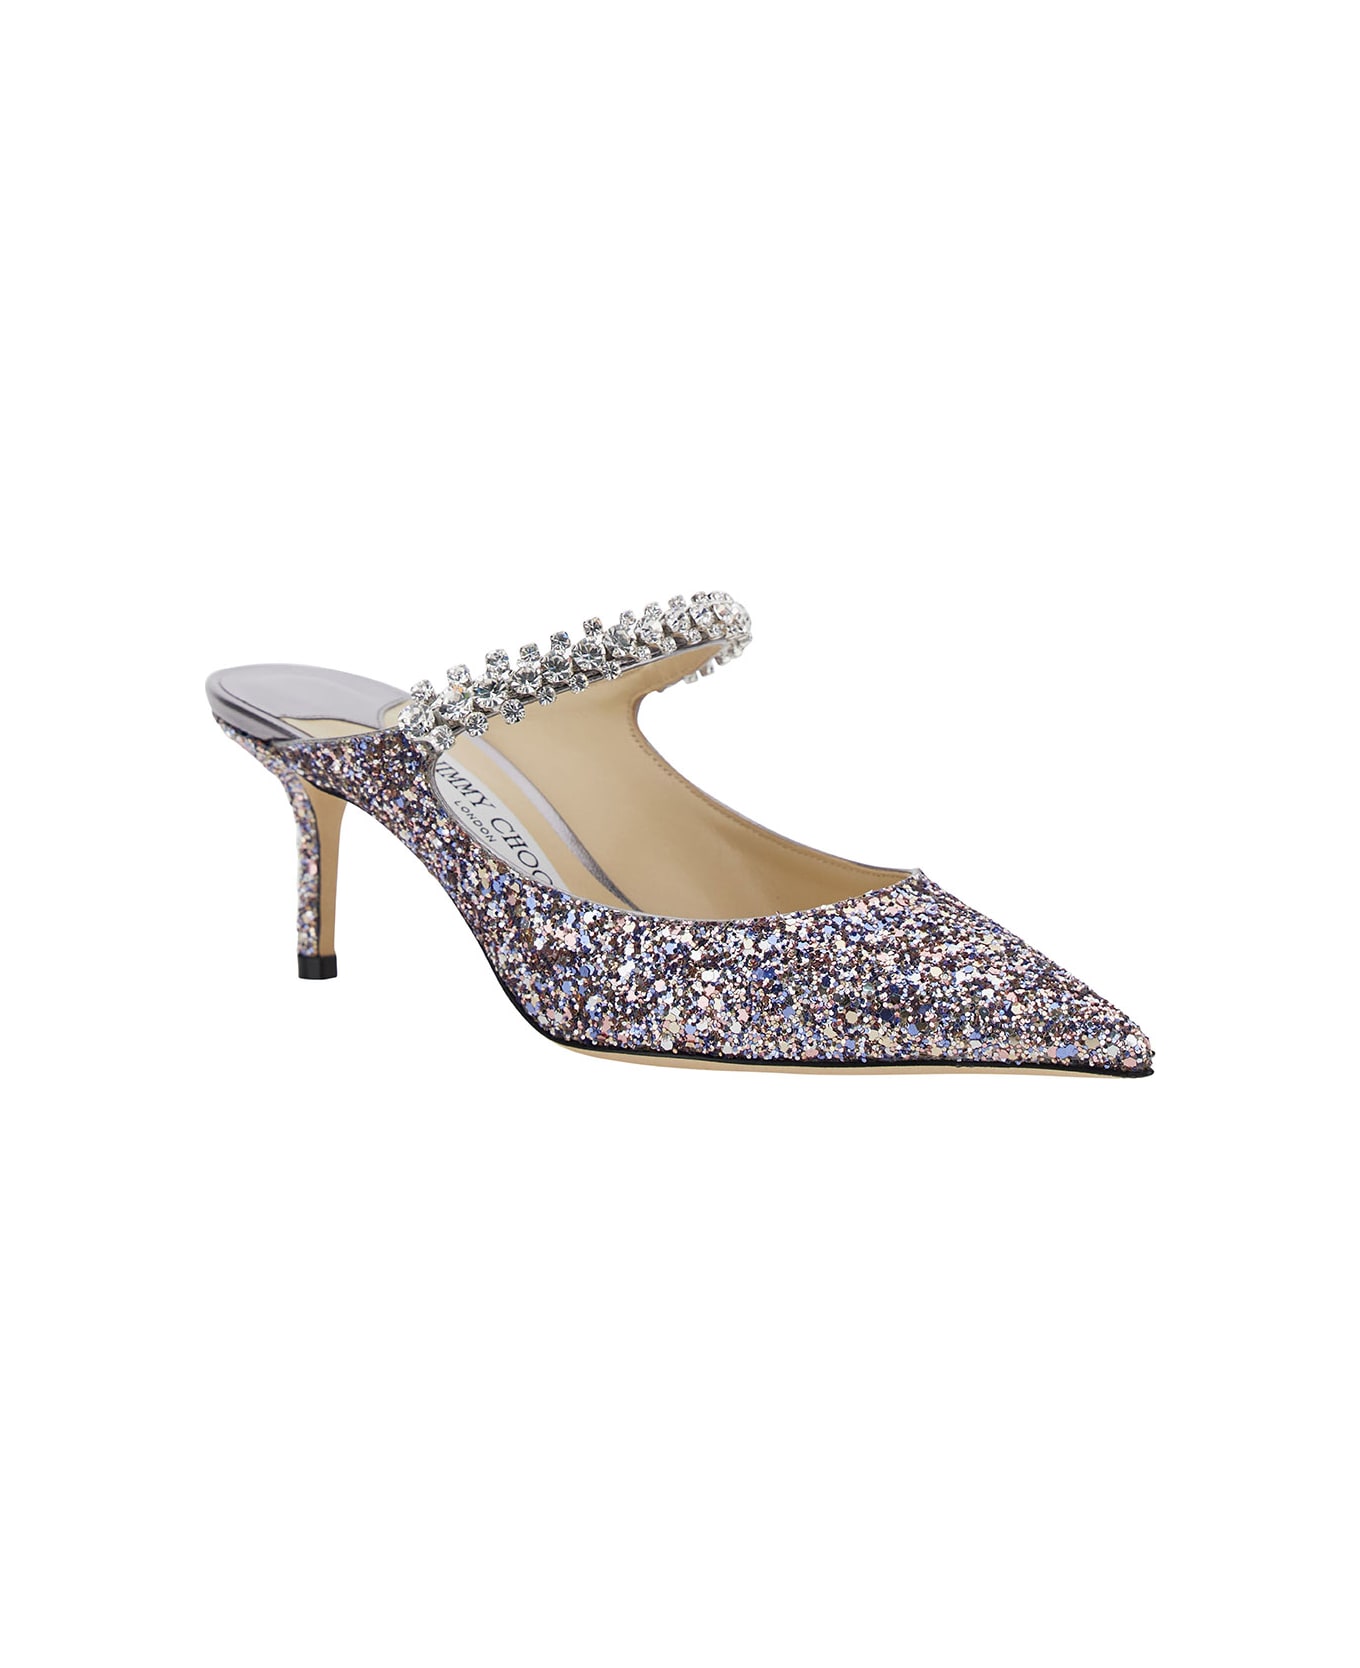 Jimmy Choo 'bing 65' Multicolor Sabot With Crystal Strap In Leather Woman - Metallic